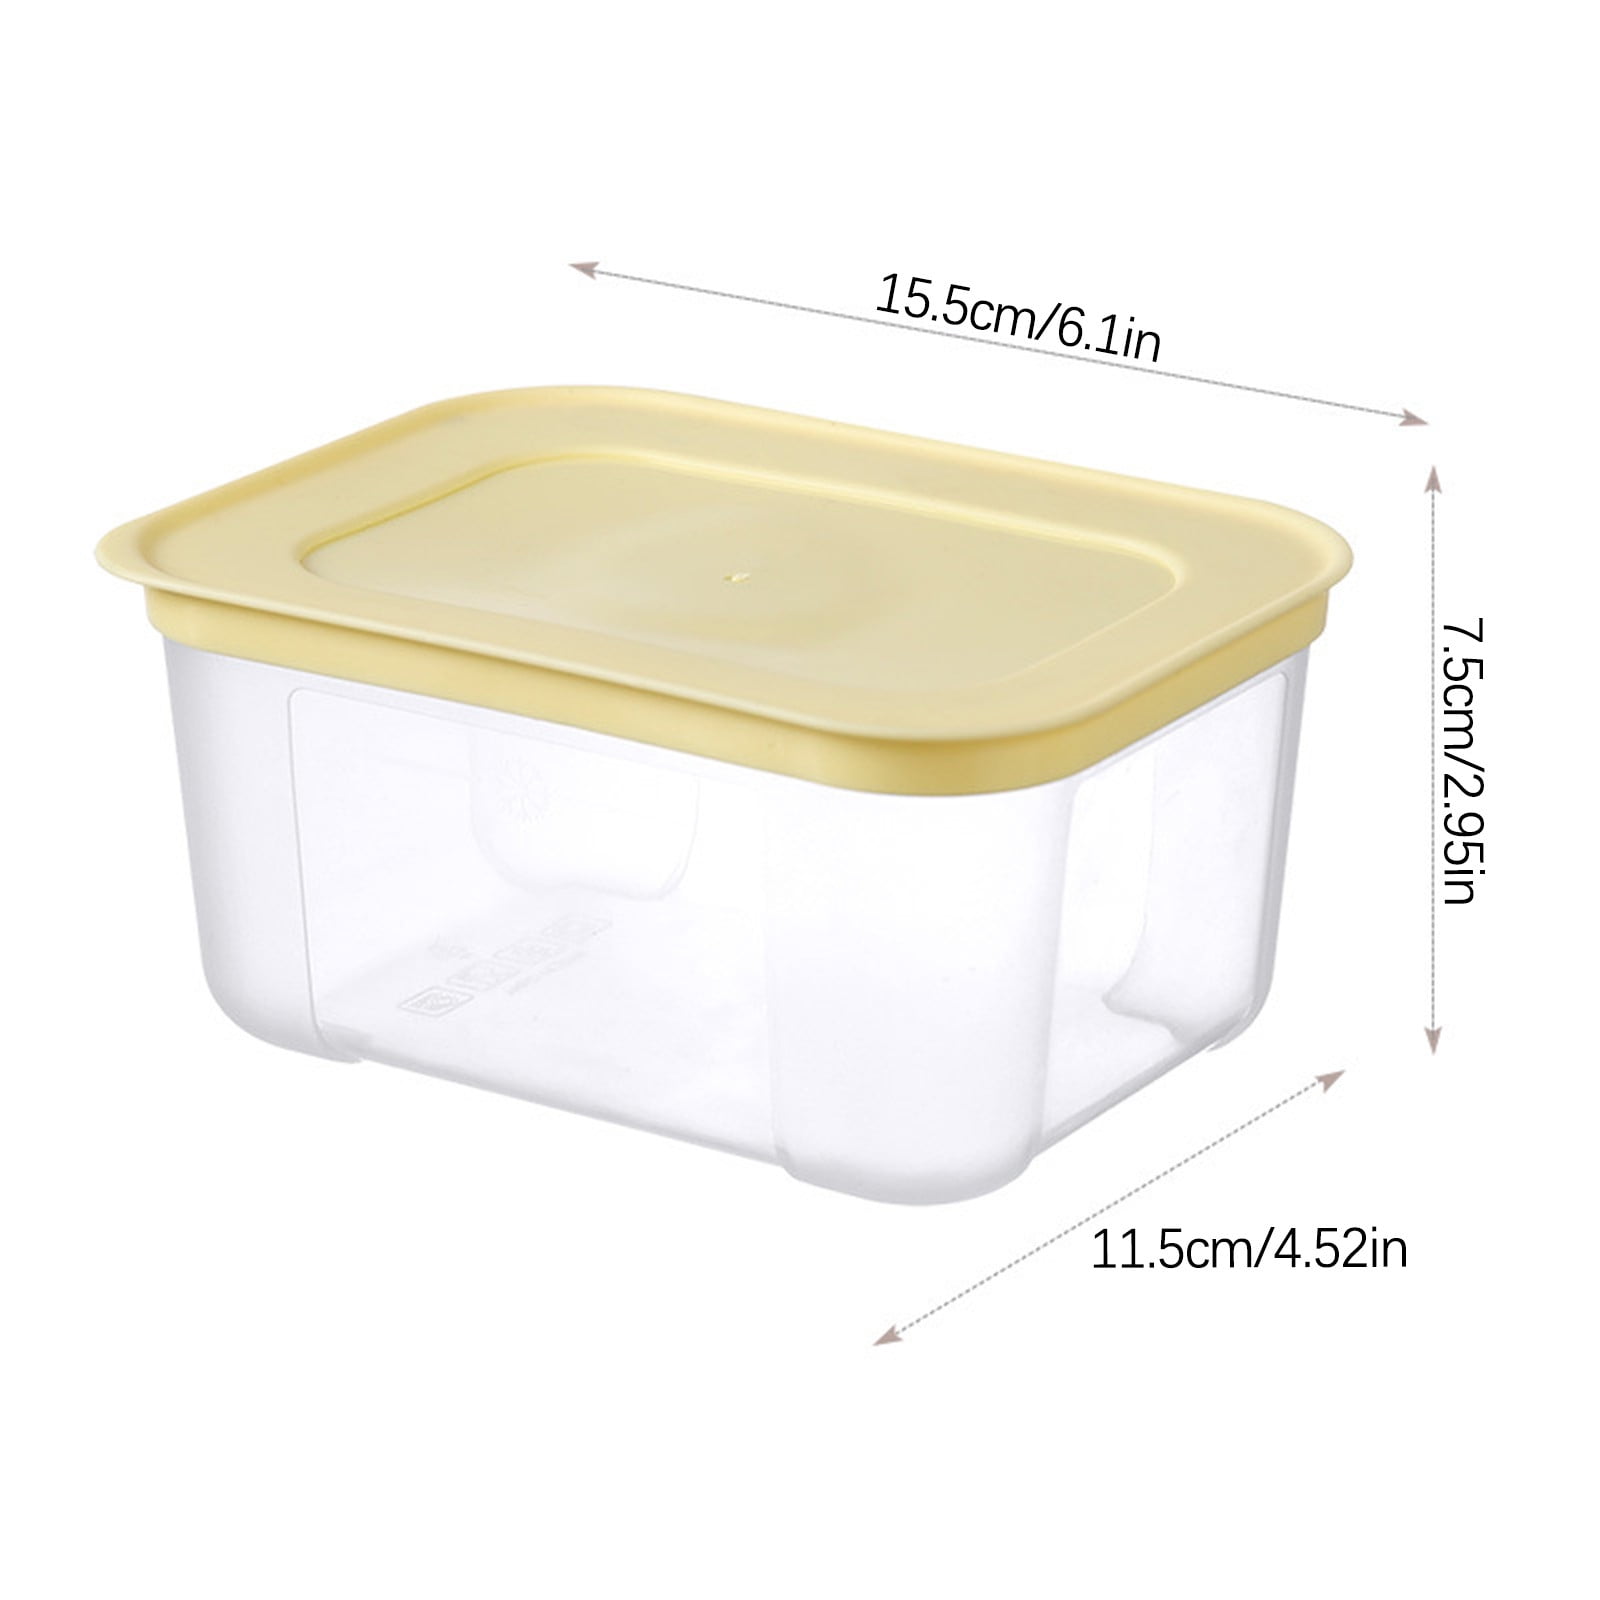 Food Storage Container Sale: Save on the Ailtec 18-Piece Set